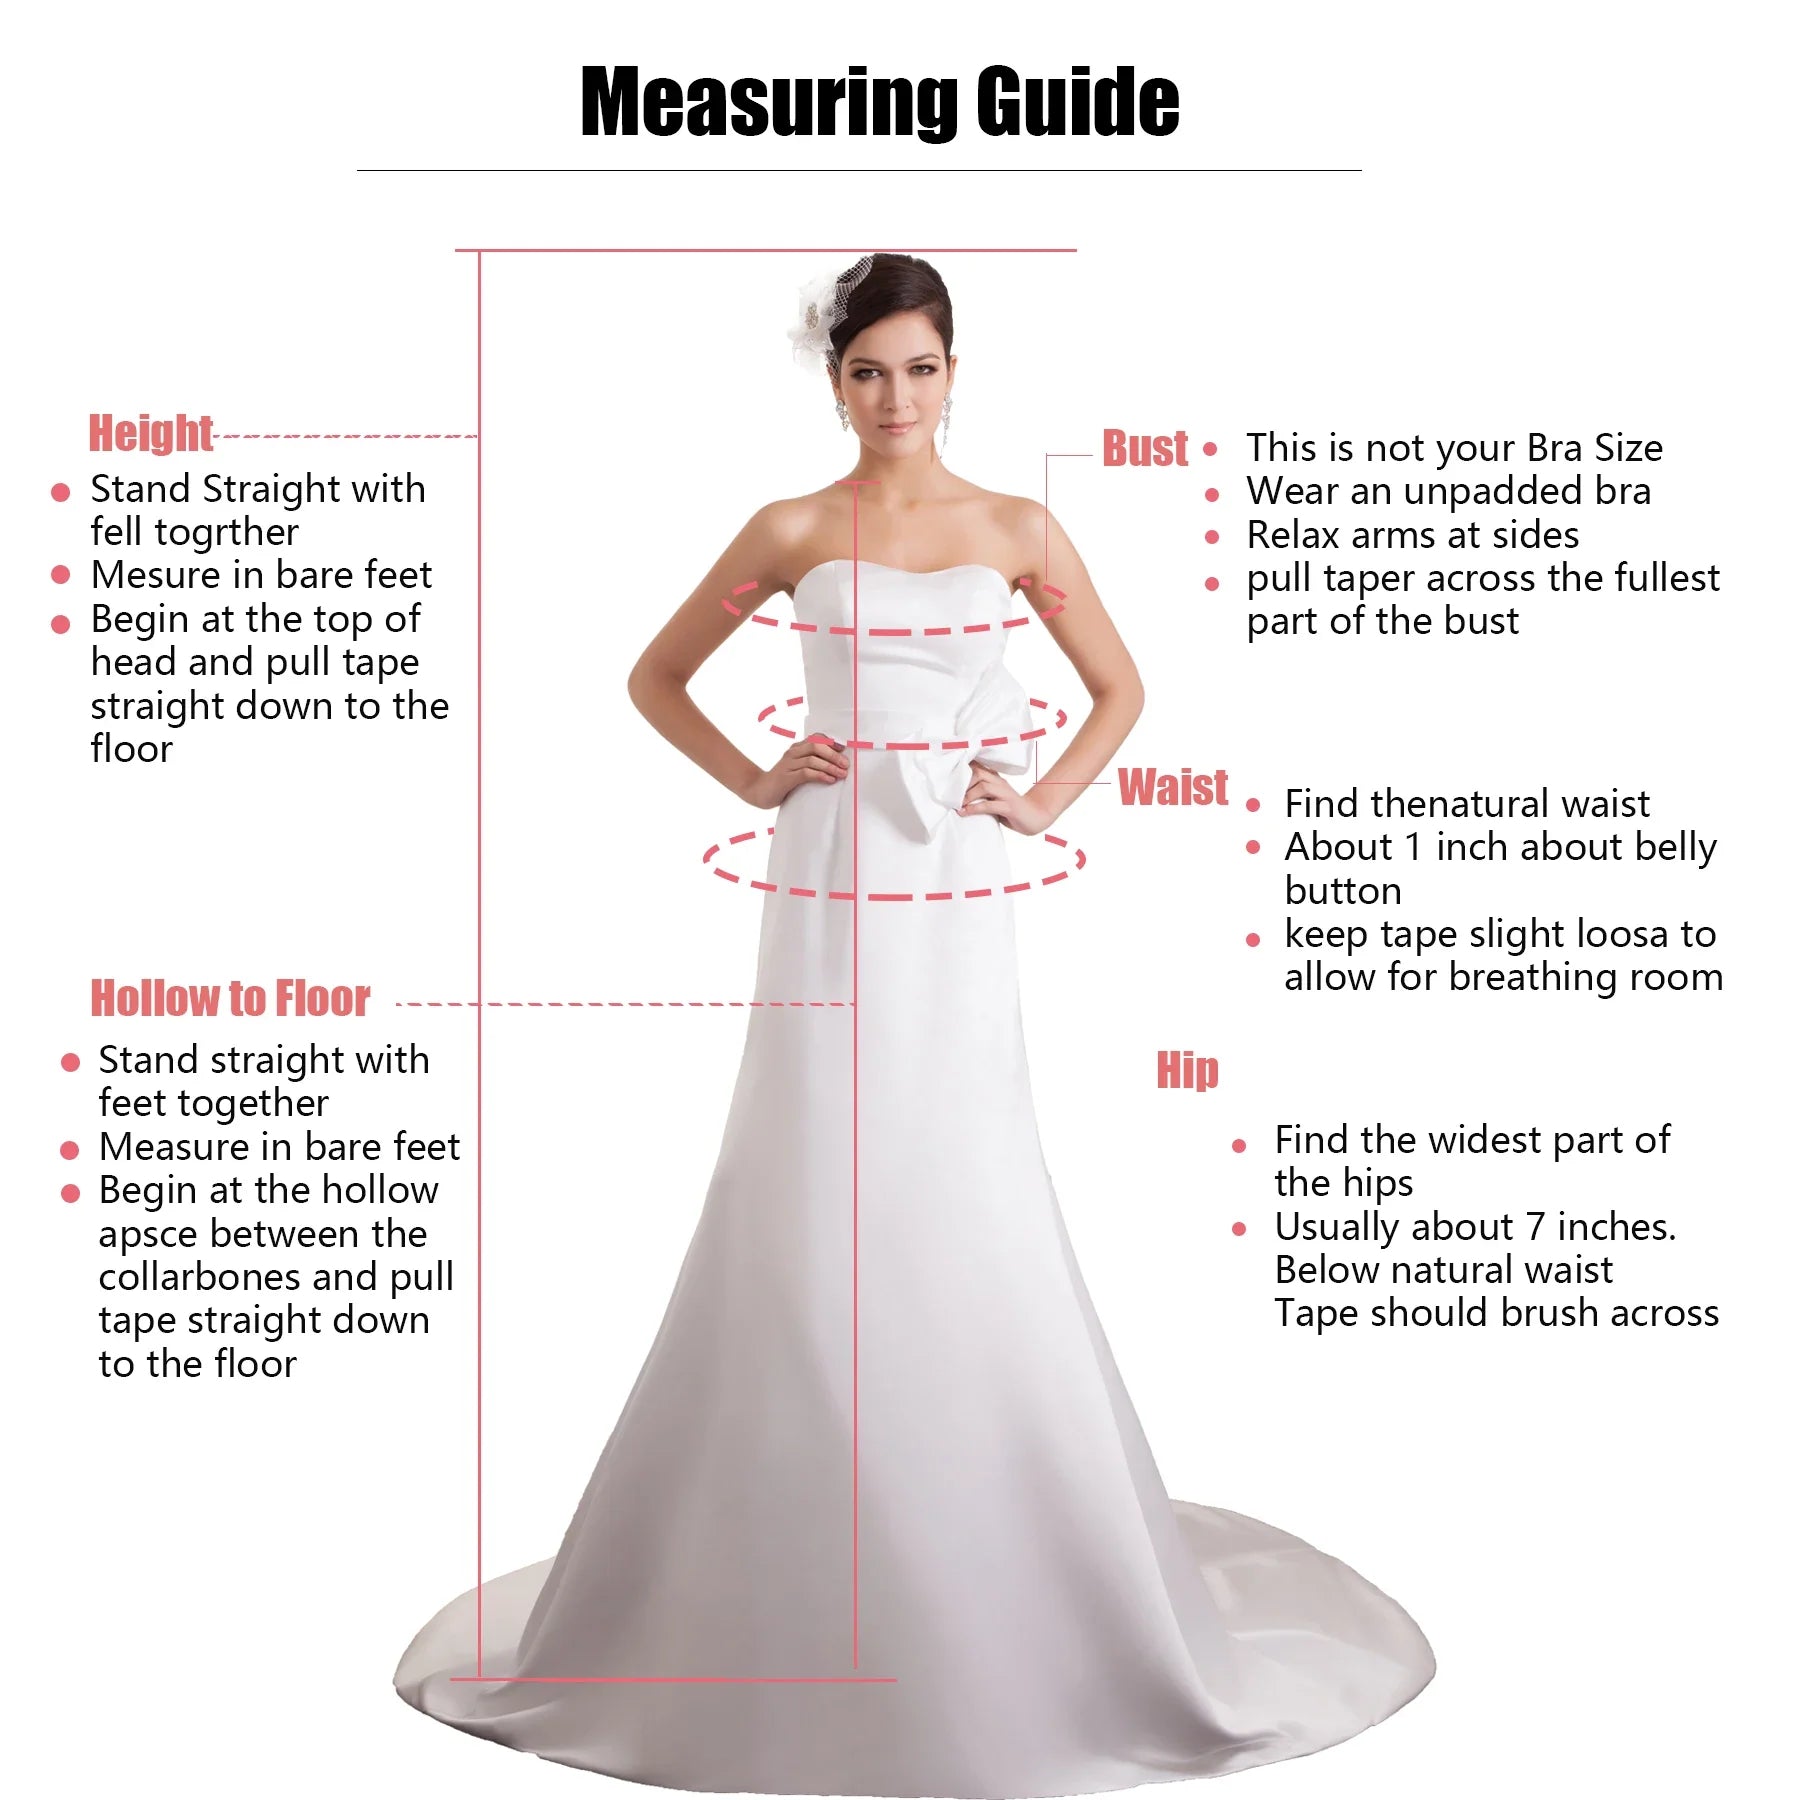 Luxury White Women's Wedding Dresses Robe Bridal Gowns Lace Applique Illusion Crystal Beads String Elegant High-End